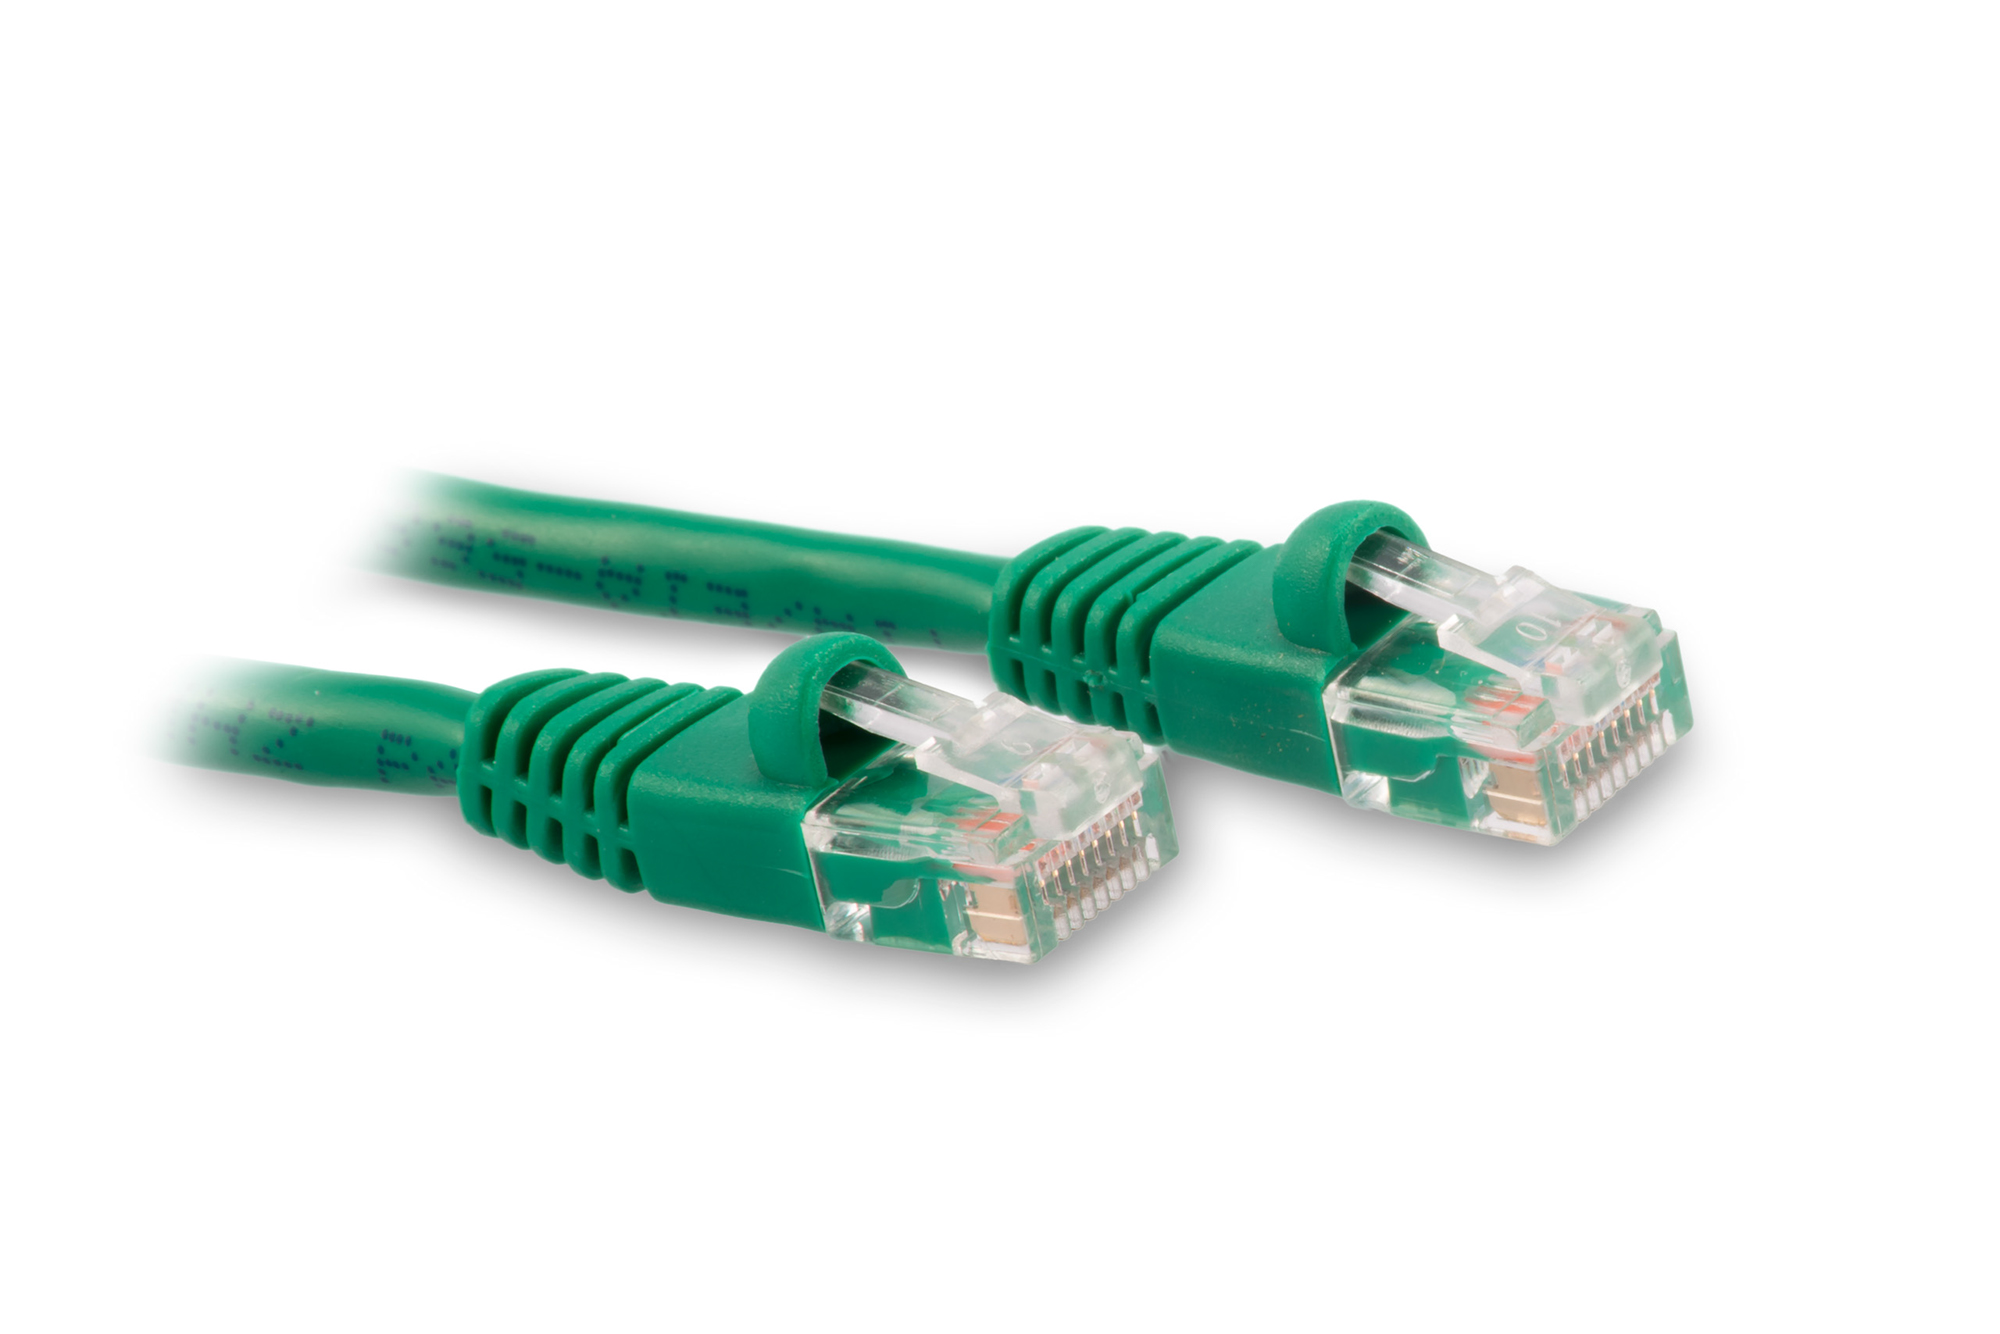 10ft Cat6 Ethernet Patch Cable - Green Color - Snagless Boot, Stranded, RJ45, 550Mhz, 24AWG